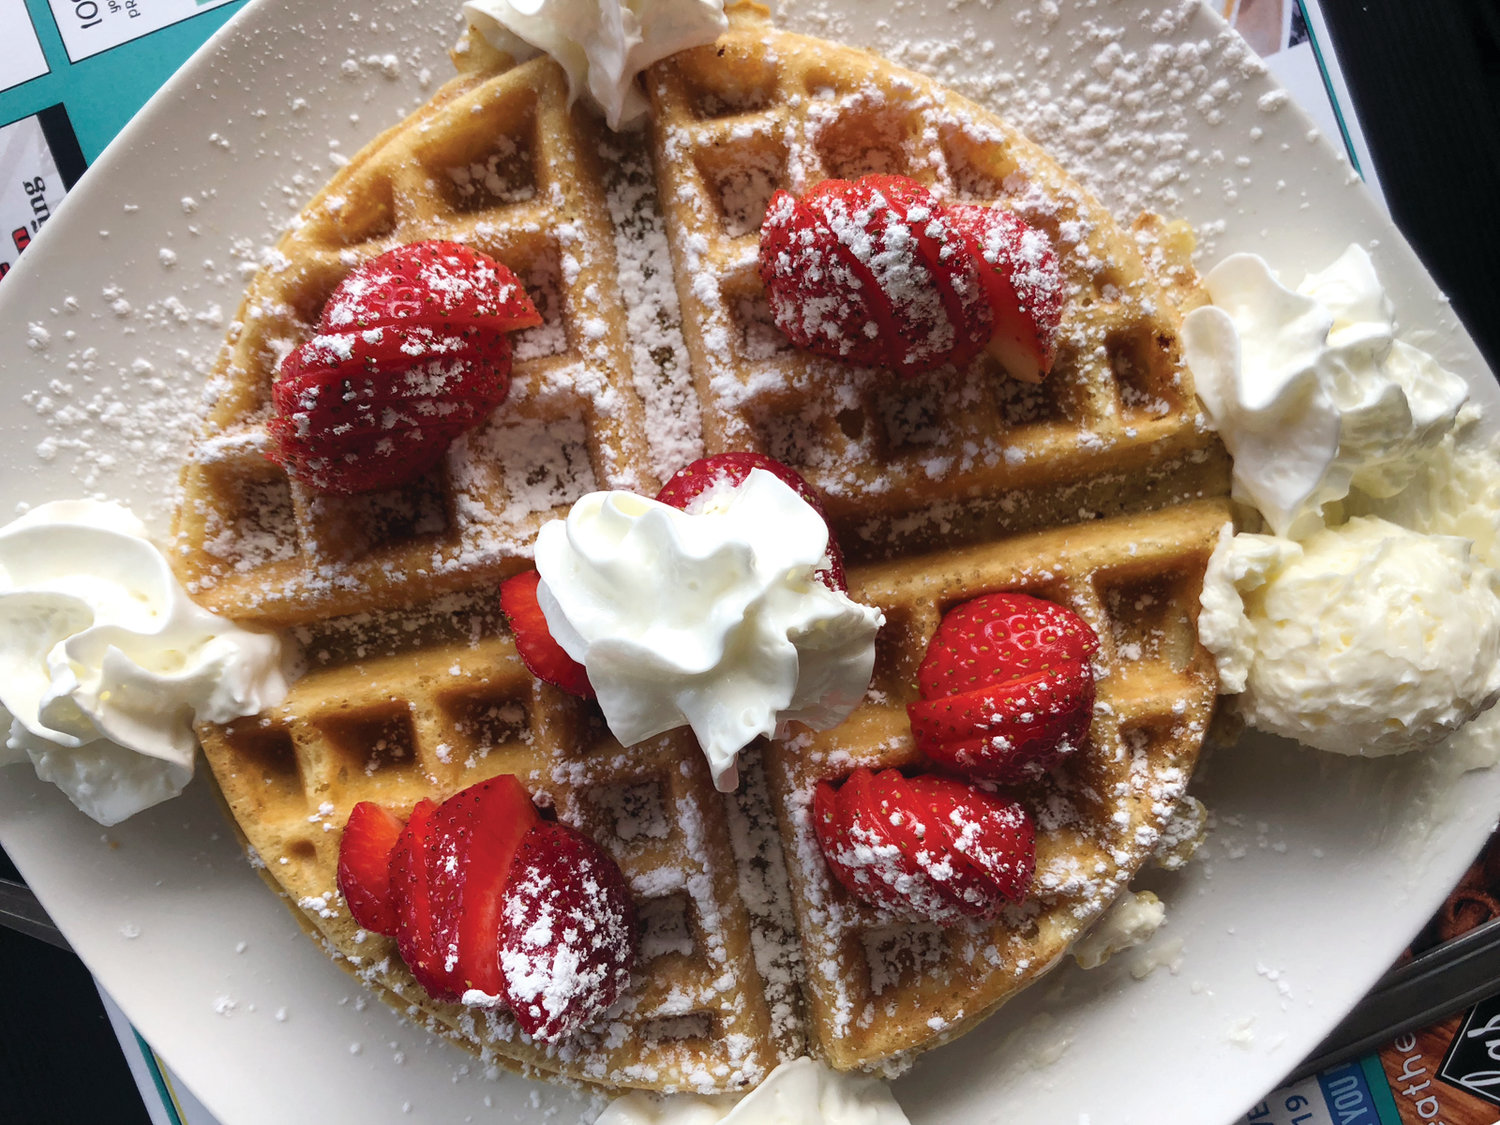 Breakfast at Tiffany’s, the brainchild and namesake of owner Tiffany Rossi, is the perfect place to start your day with homestyle, made-to-order breakfasts ~ seven days a week. Dig your teeth into this fluffy waffle, dotted with fresh whipped cream and butter.